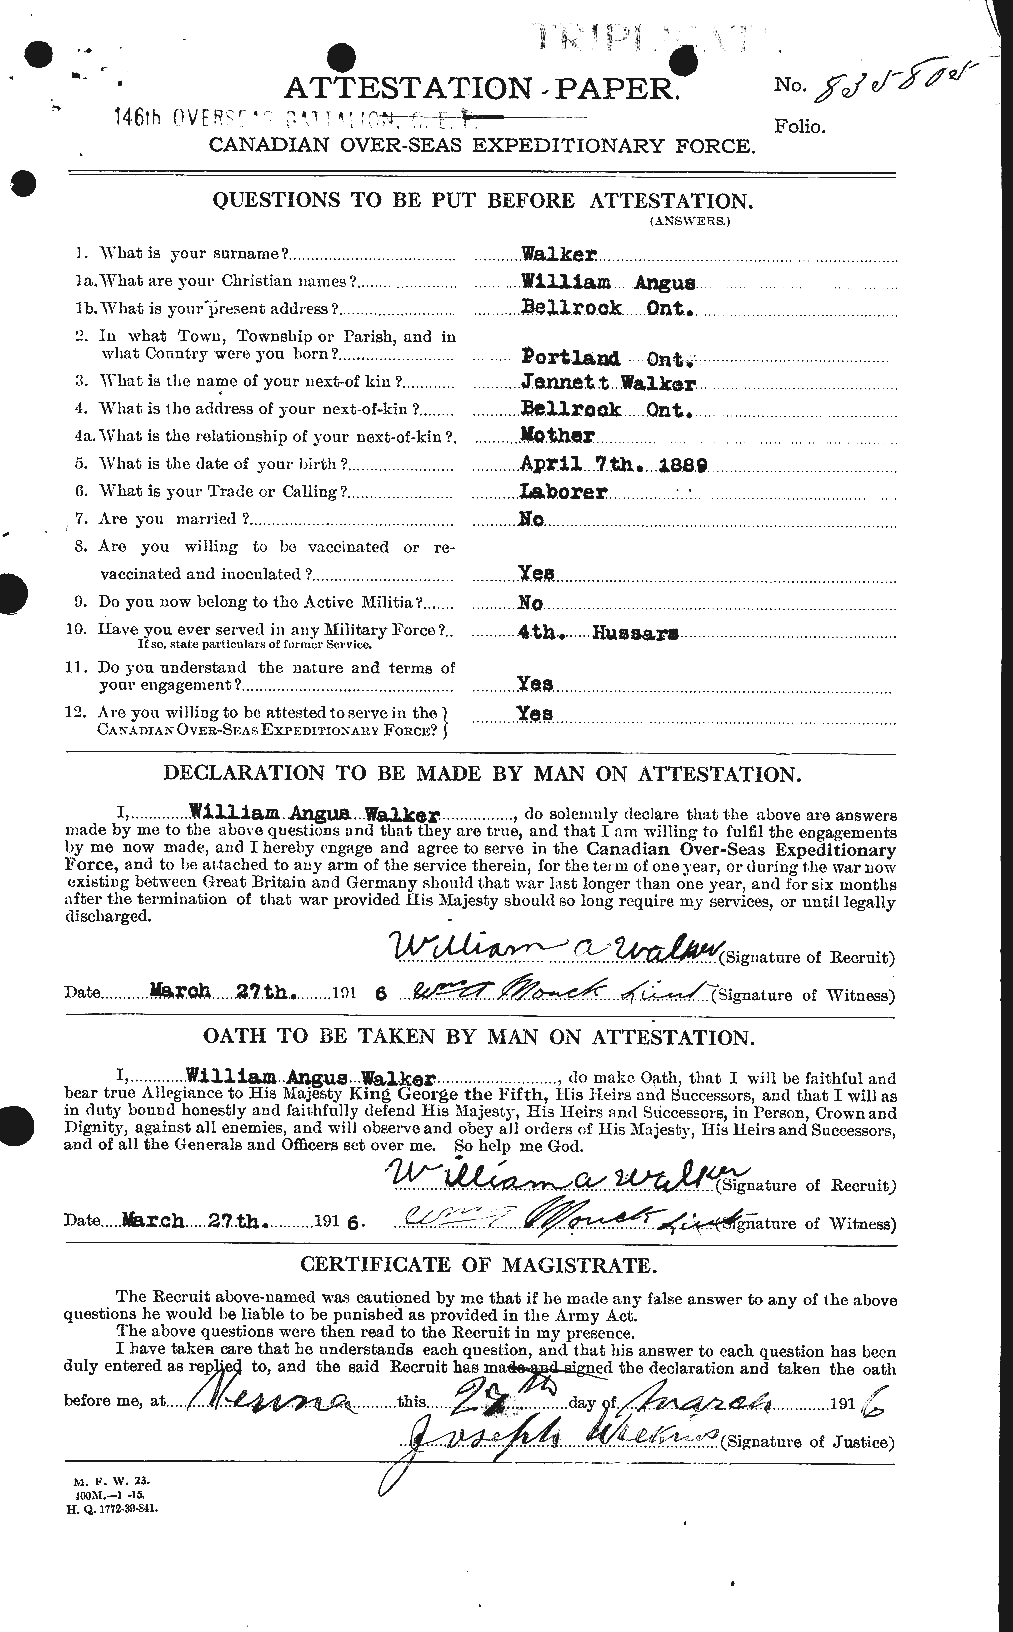 Personnel Records of the First World War - CEF 655926a